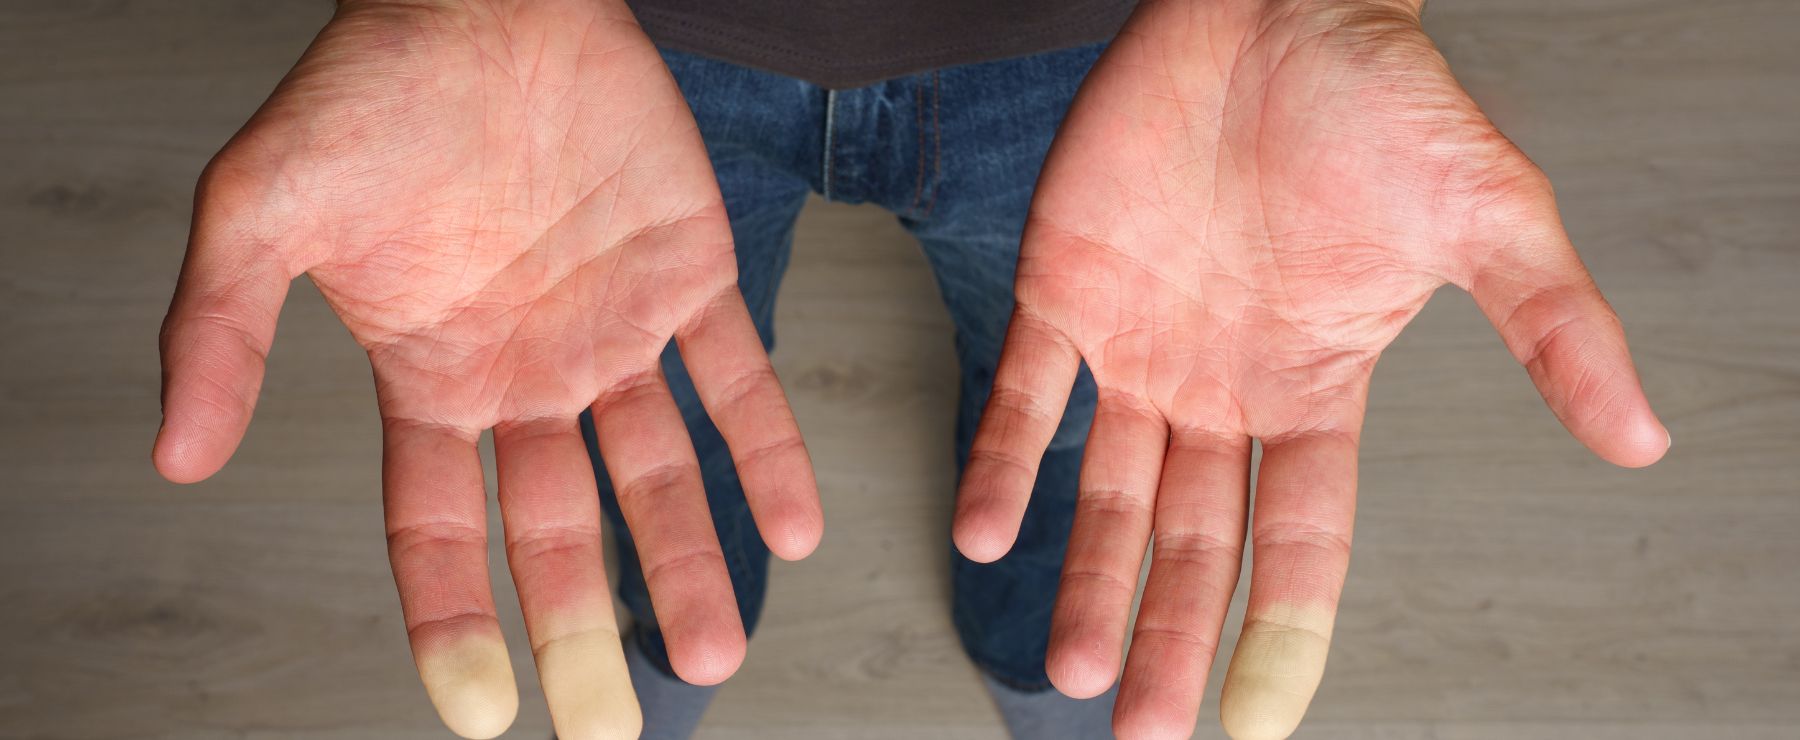 man holds out hands with blotchy skin